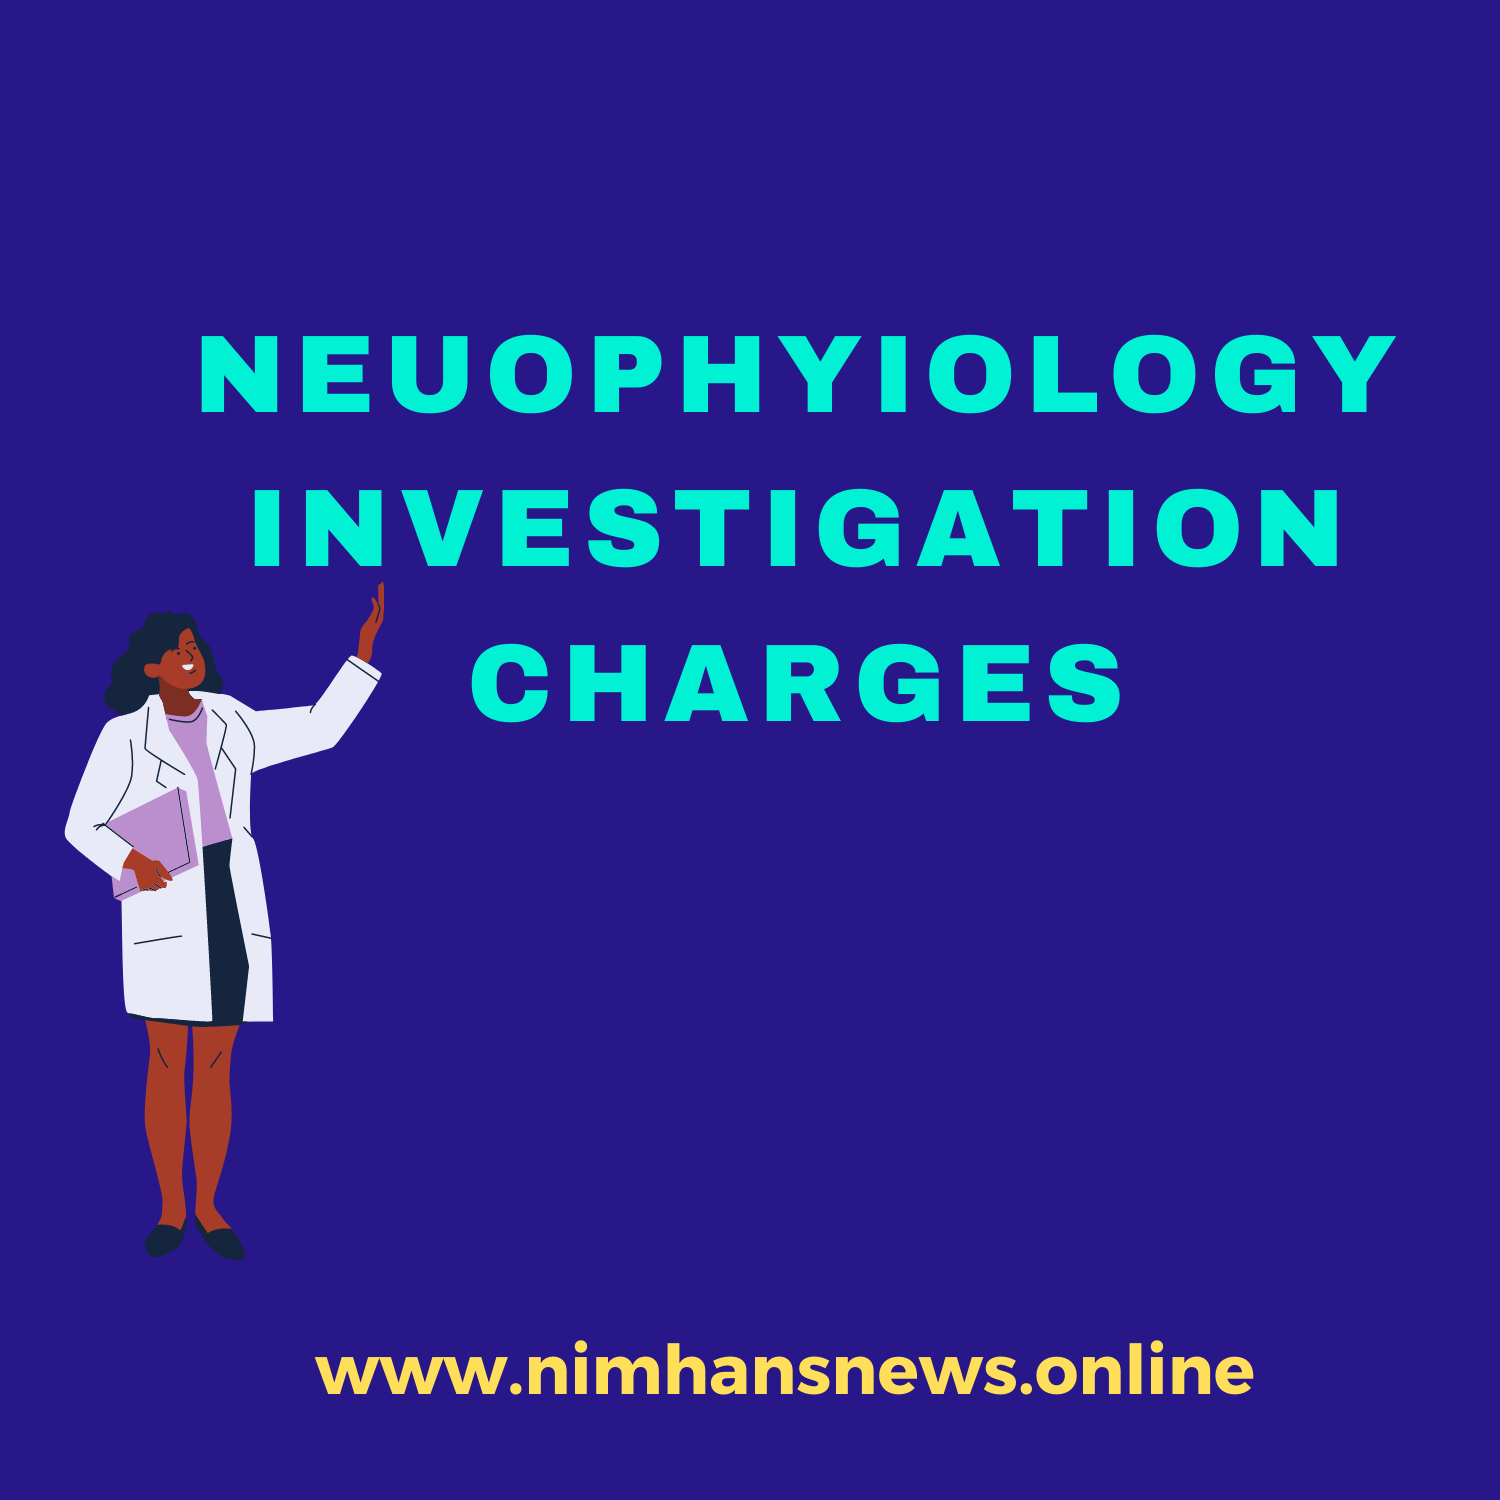 neurophysiology investigation charges